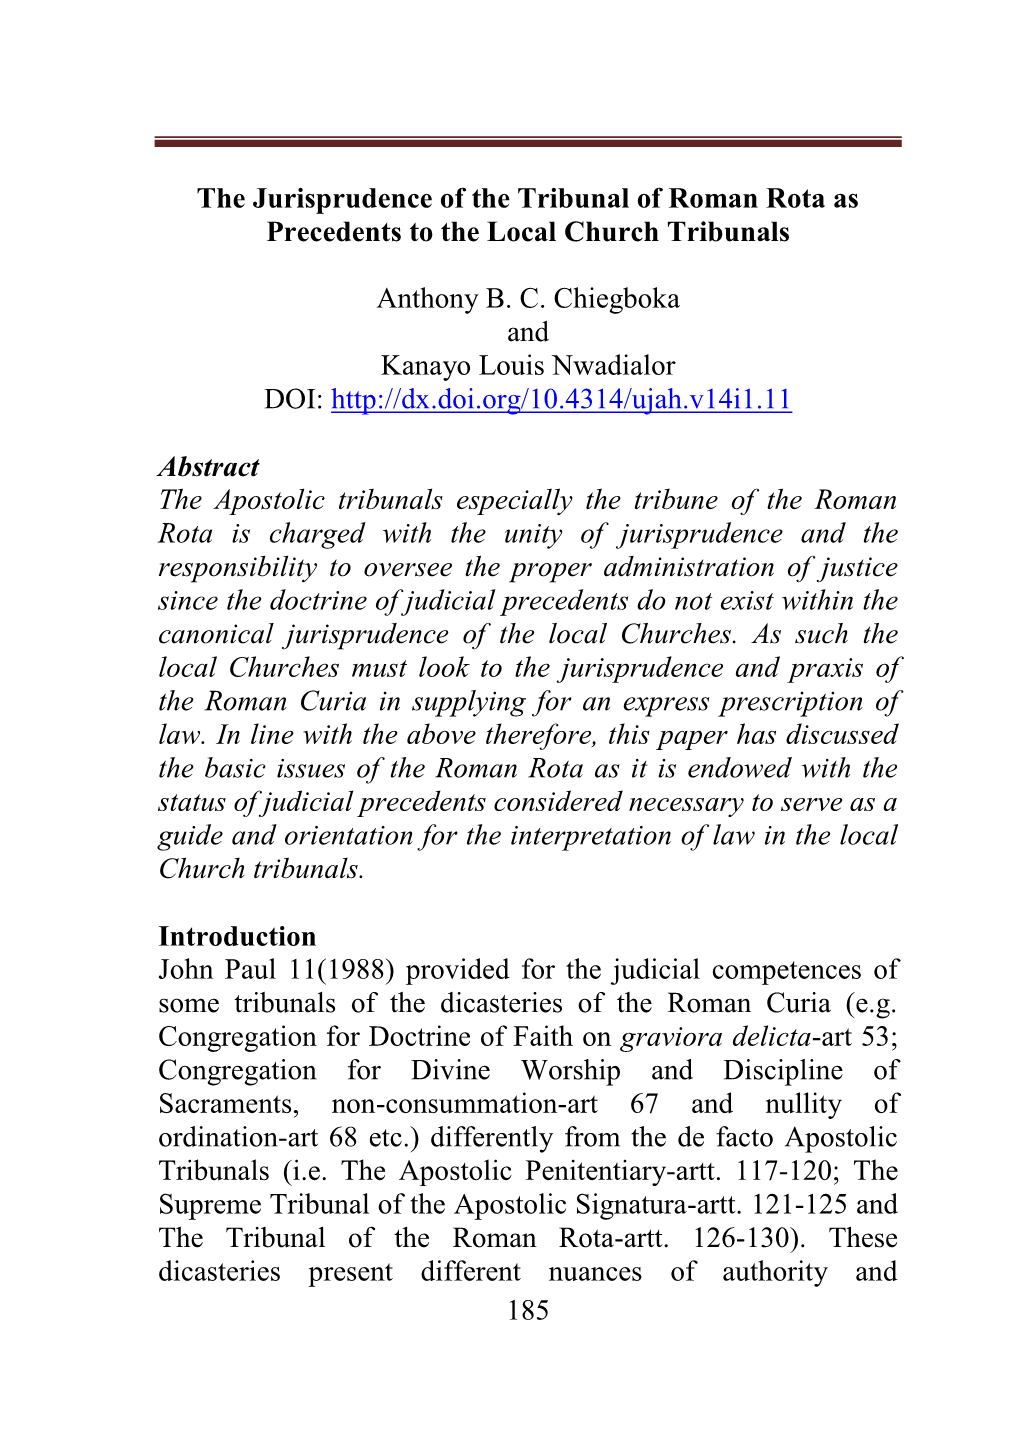 The Jurisprudence of the Tribunal of Roman Rota As Precedents to the Local Church Tribunals